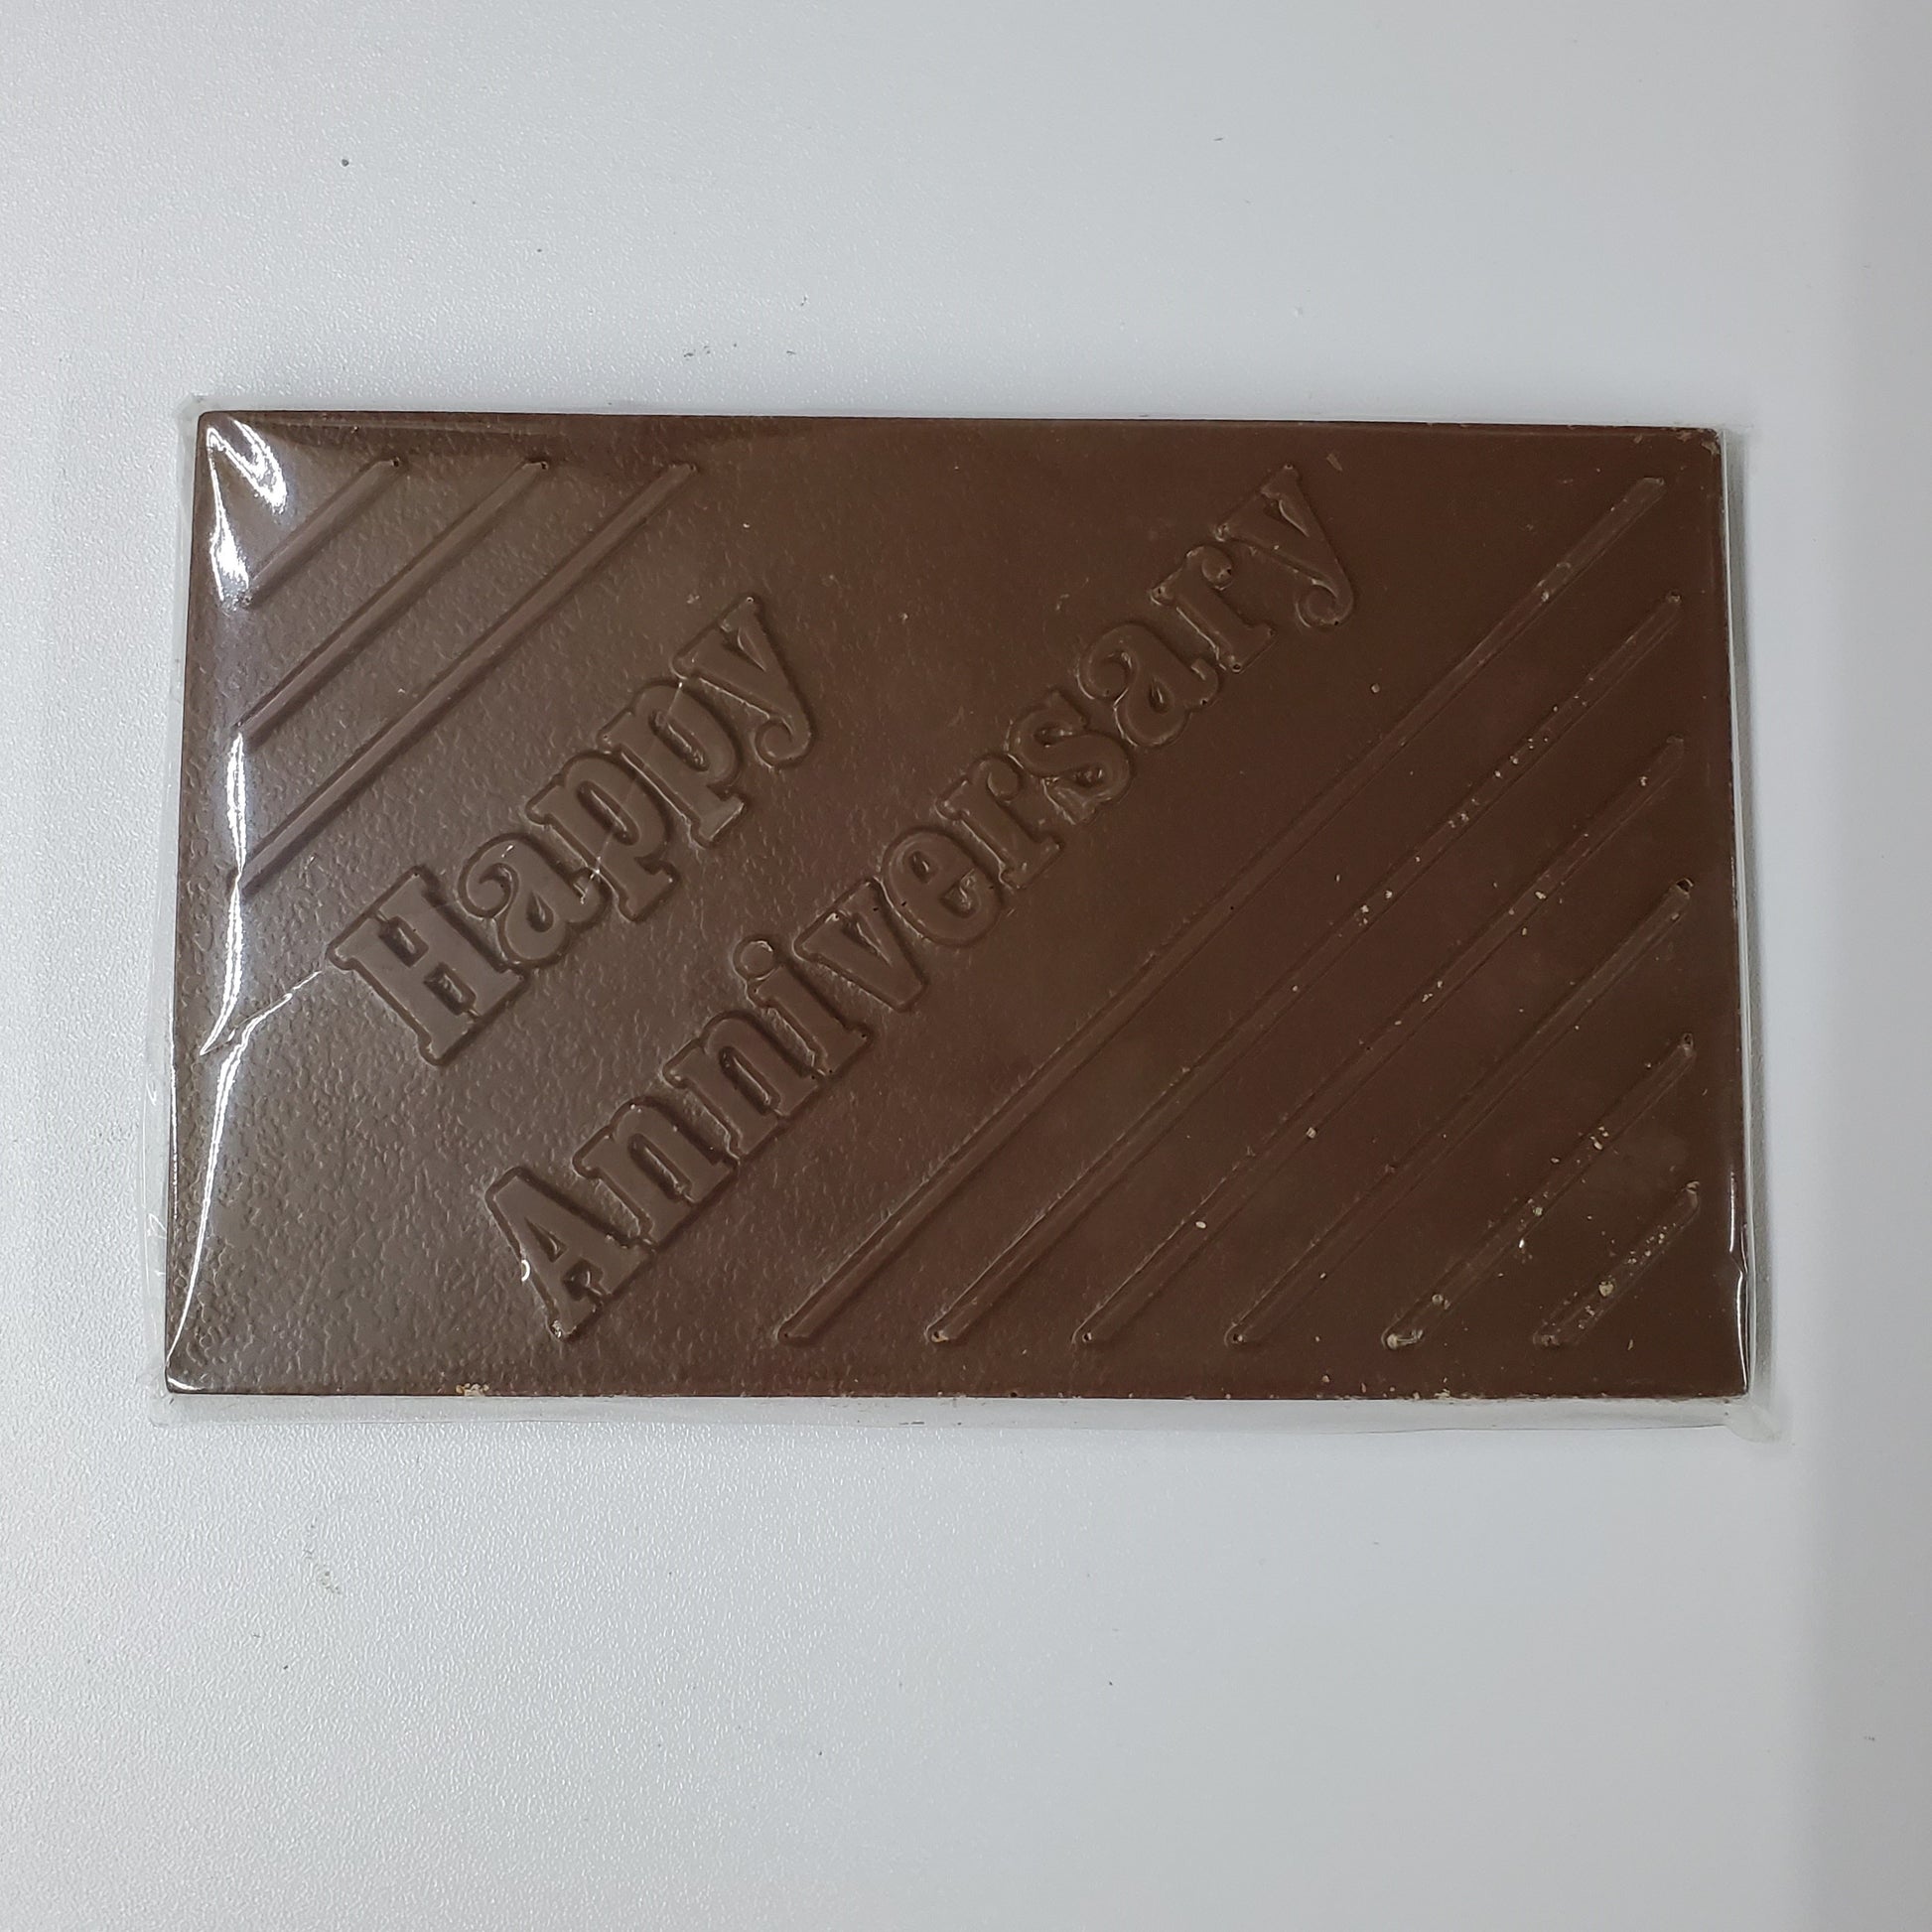 Happy Anniversary Dark Chocolate Greeting Card in wrapper